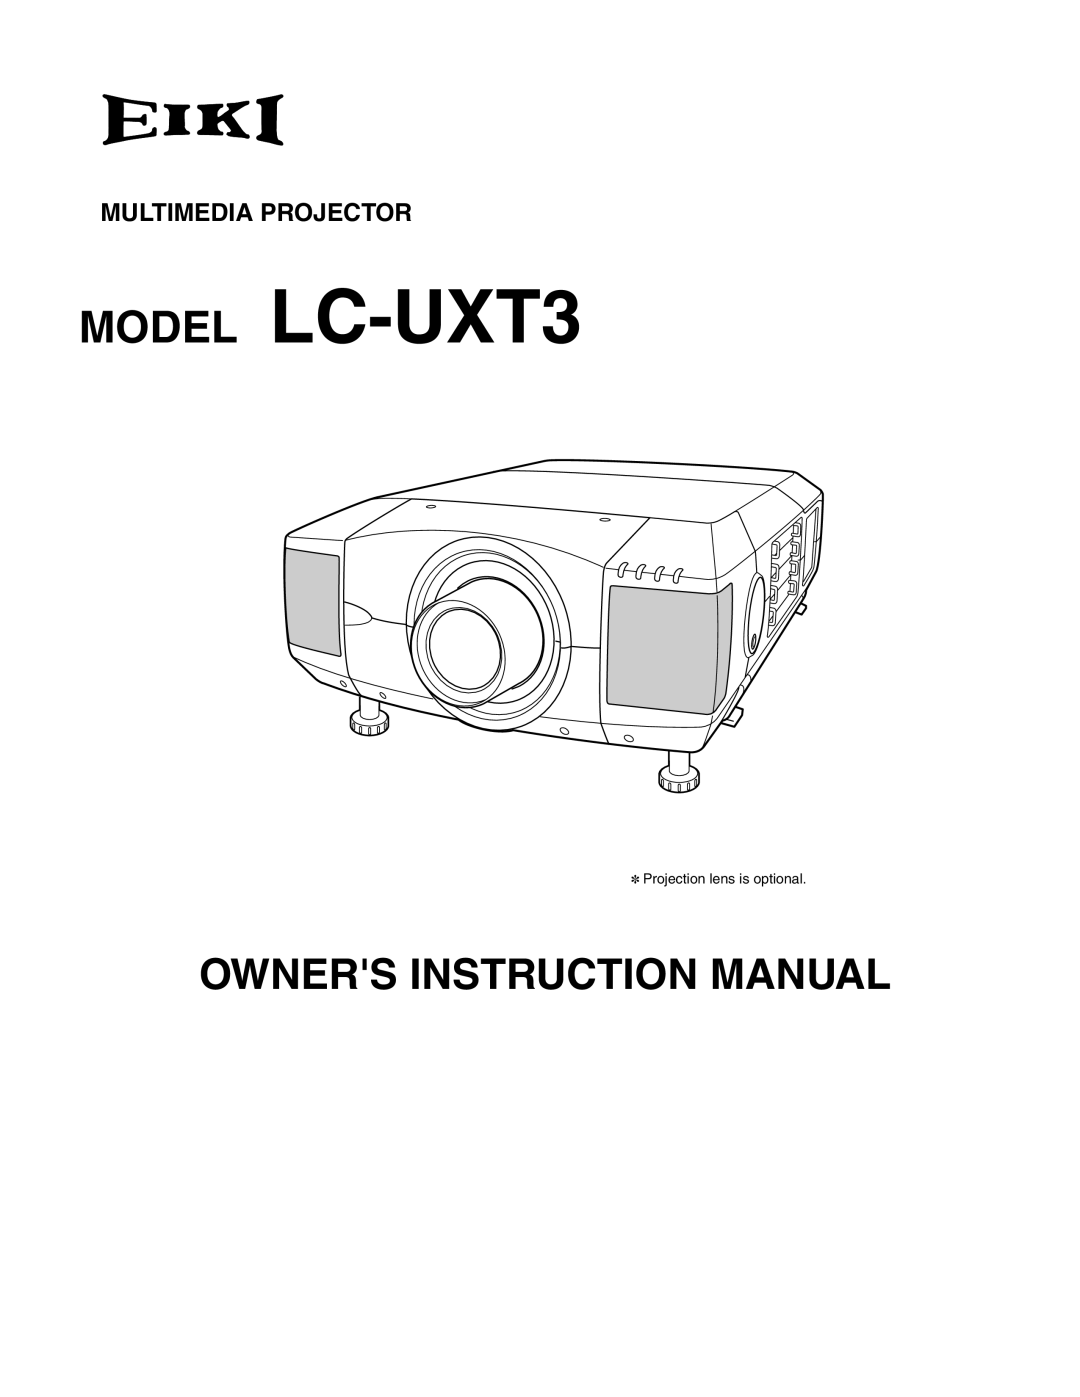 Eiki instruction manual Multimedia Projector, MODEL LC-UXT3, Owners Instruction Manual, Projection lens is optional 